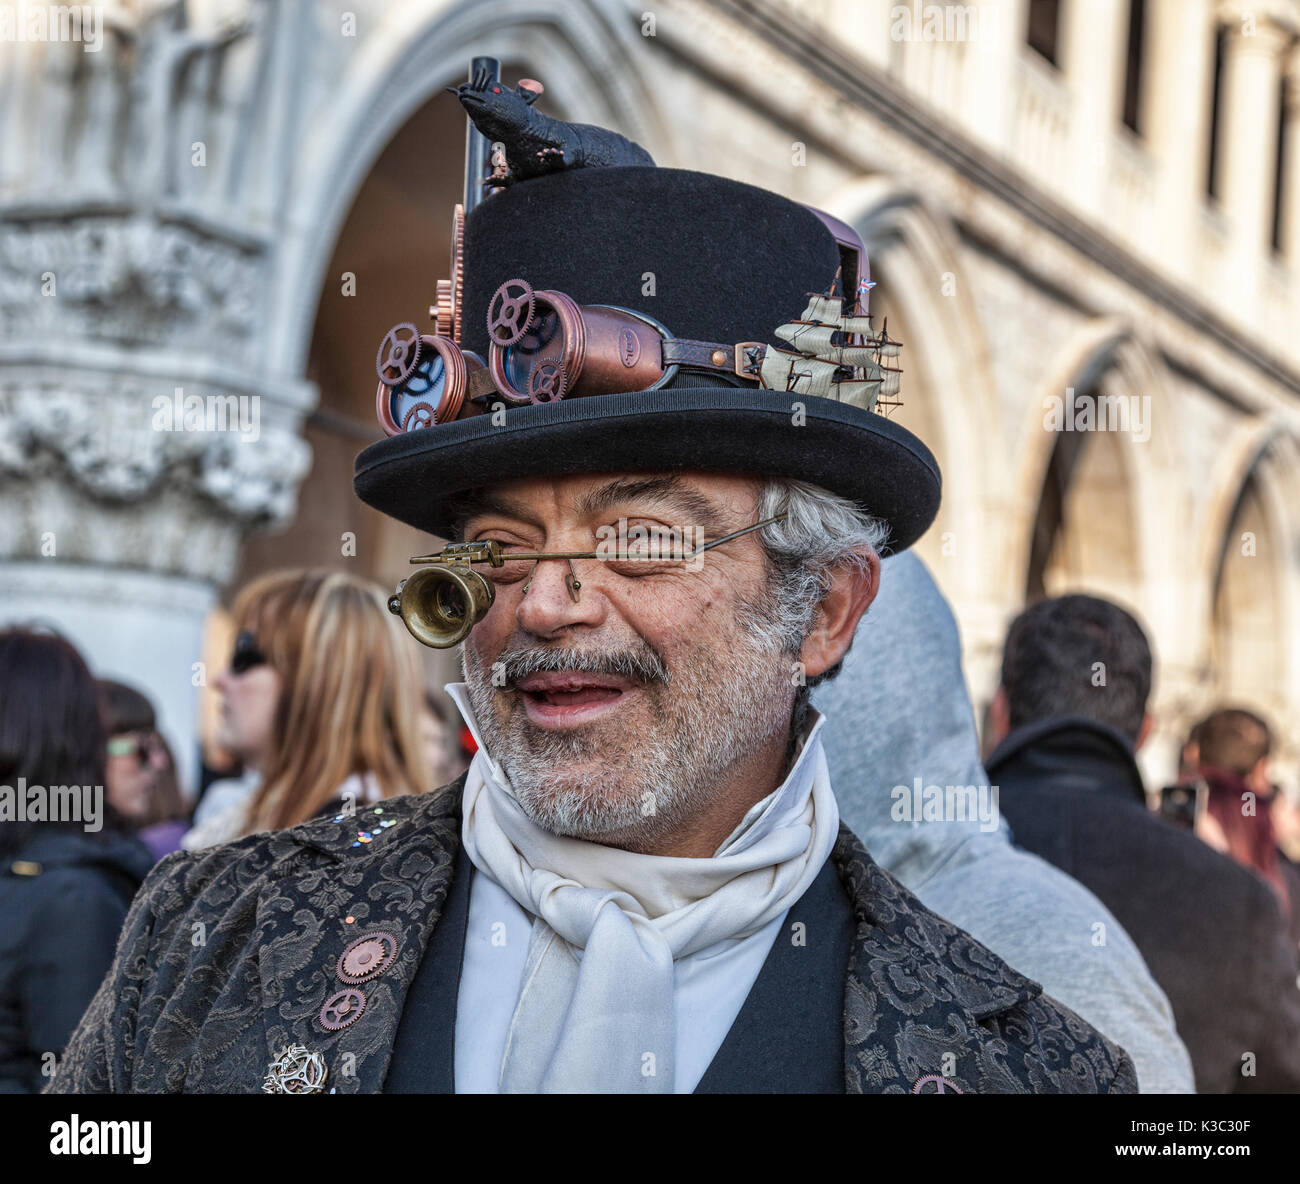 Venice, Italy- February 18th, 2012: Environmental portrait of aa eccentric man funny disguised during the Venice Carnival days. Stock Photo